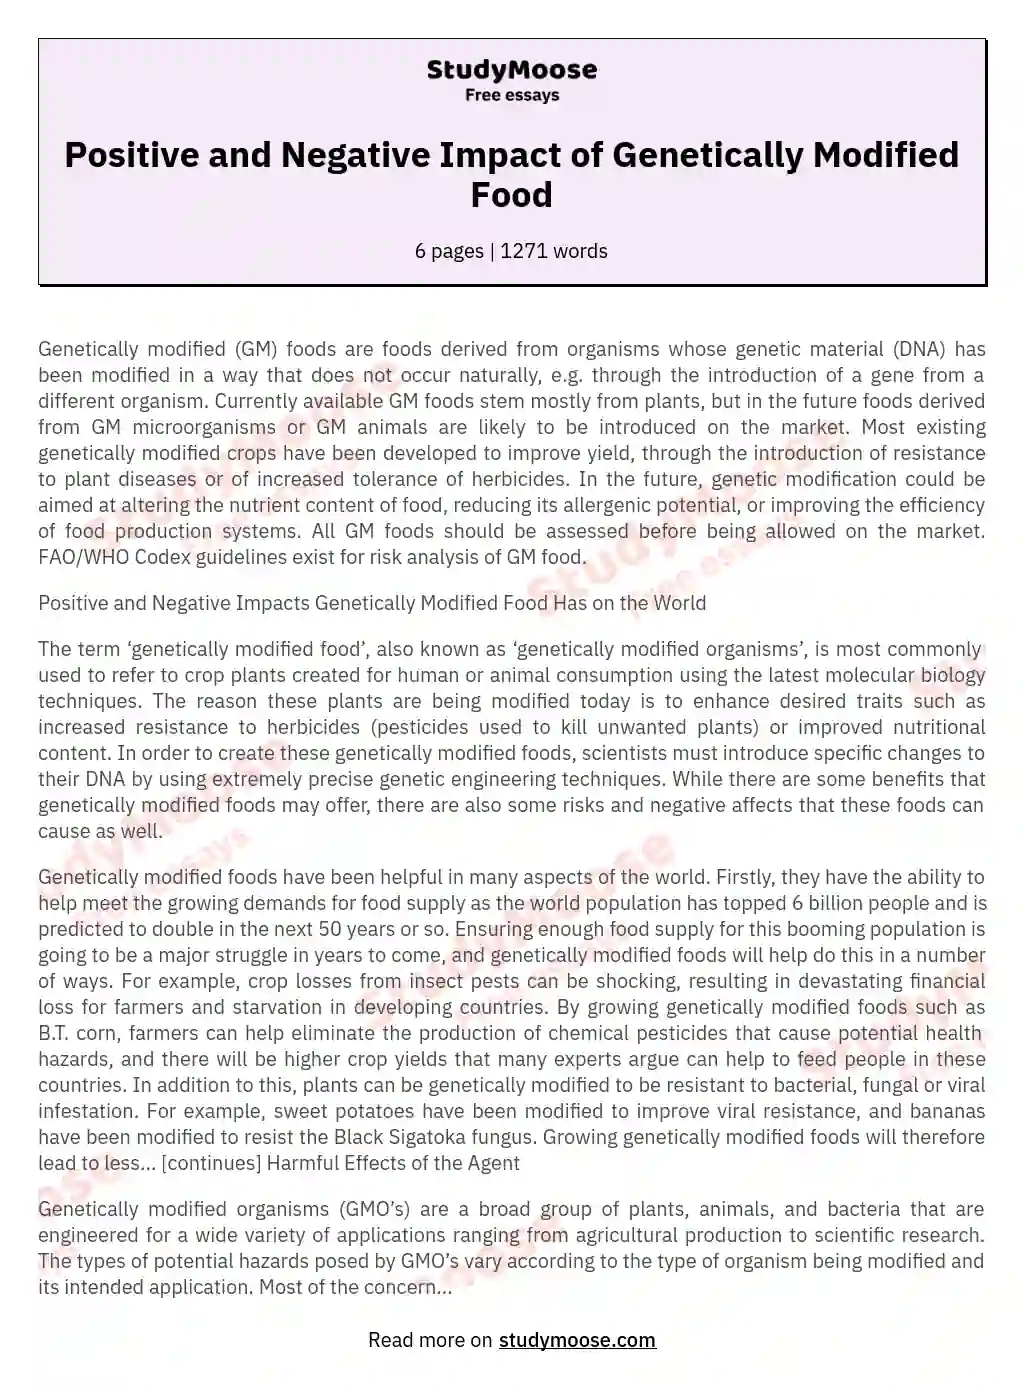 Positive and Negative Impact of Genetically Modified Food essay